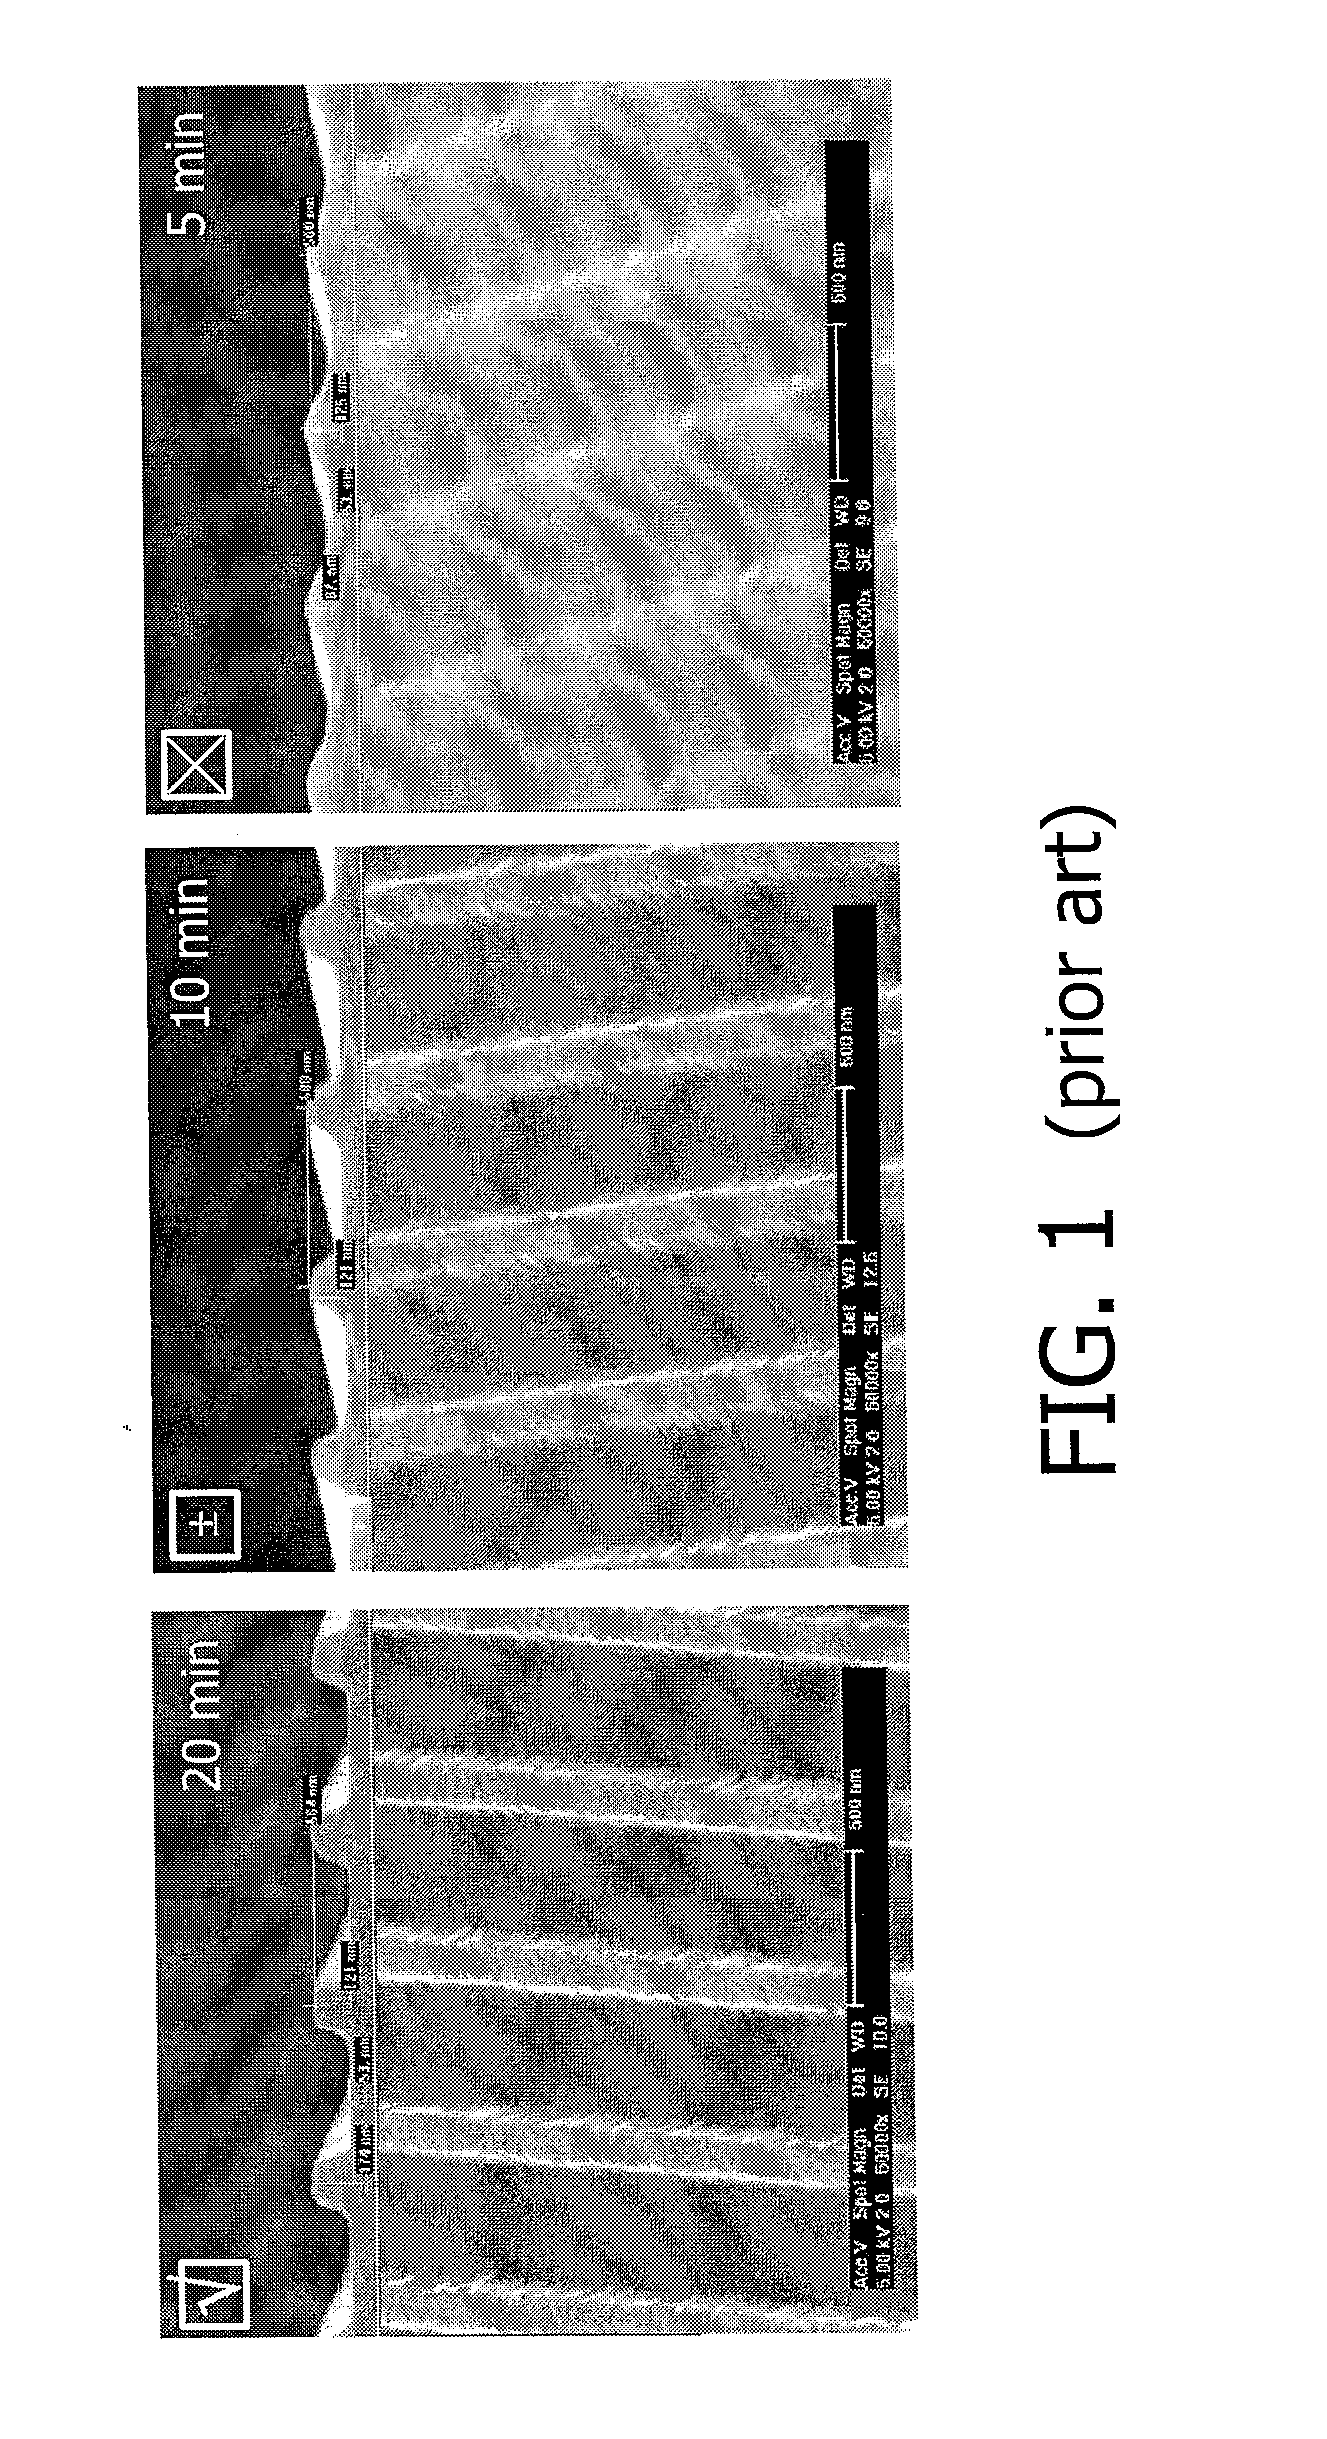 Aqueous curable imprintable medium and patterned layer forming method